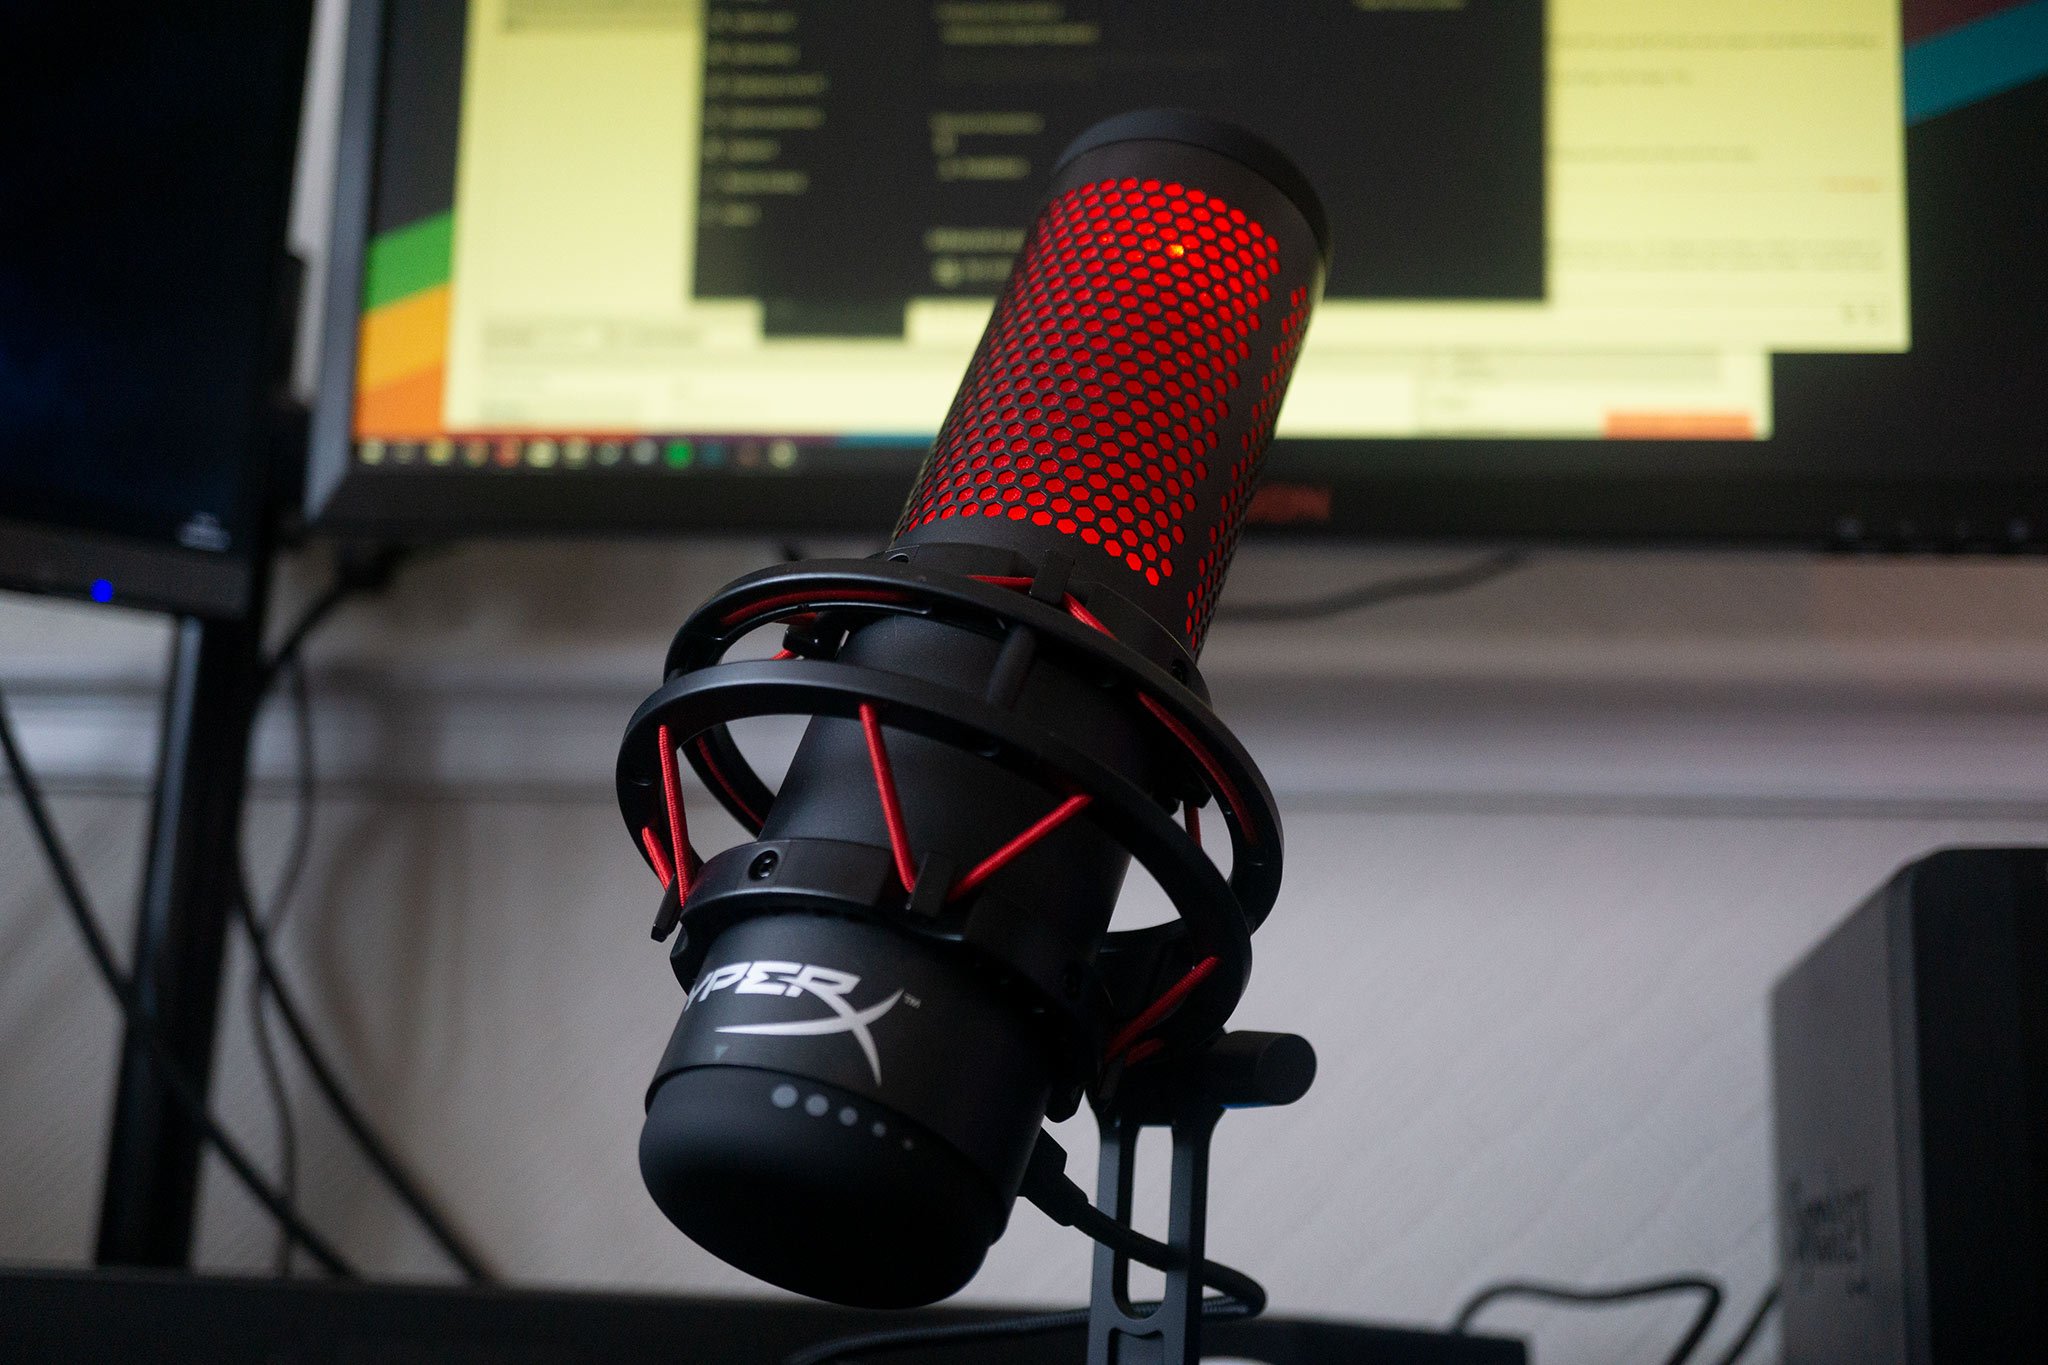 THIS IS IT CHIEF. HyperX Quadcast Microphone Review 